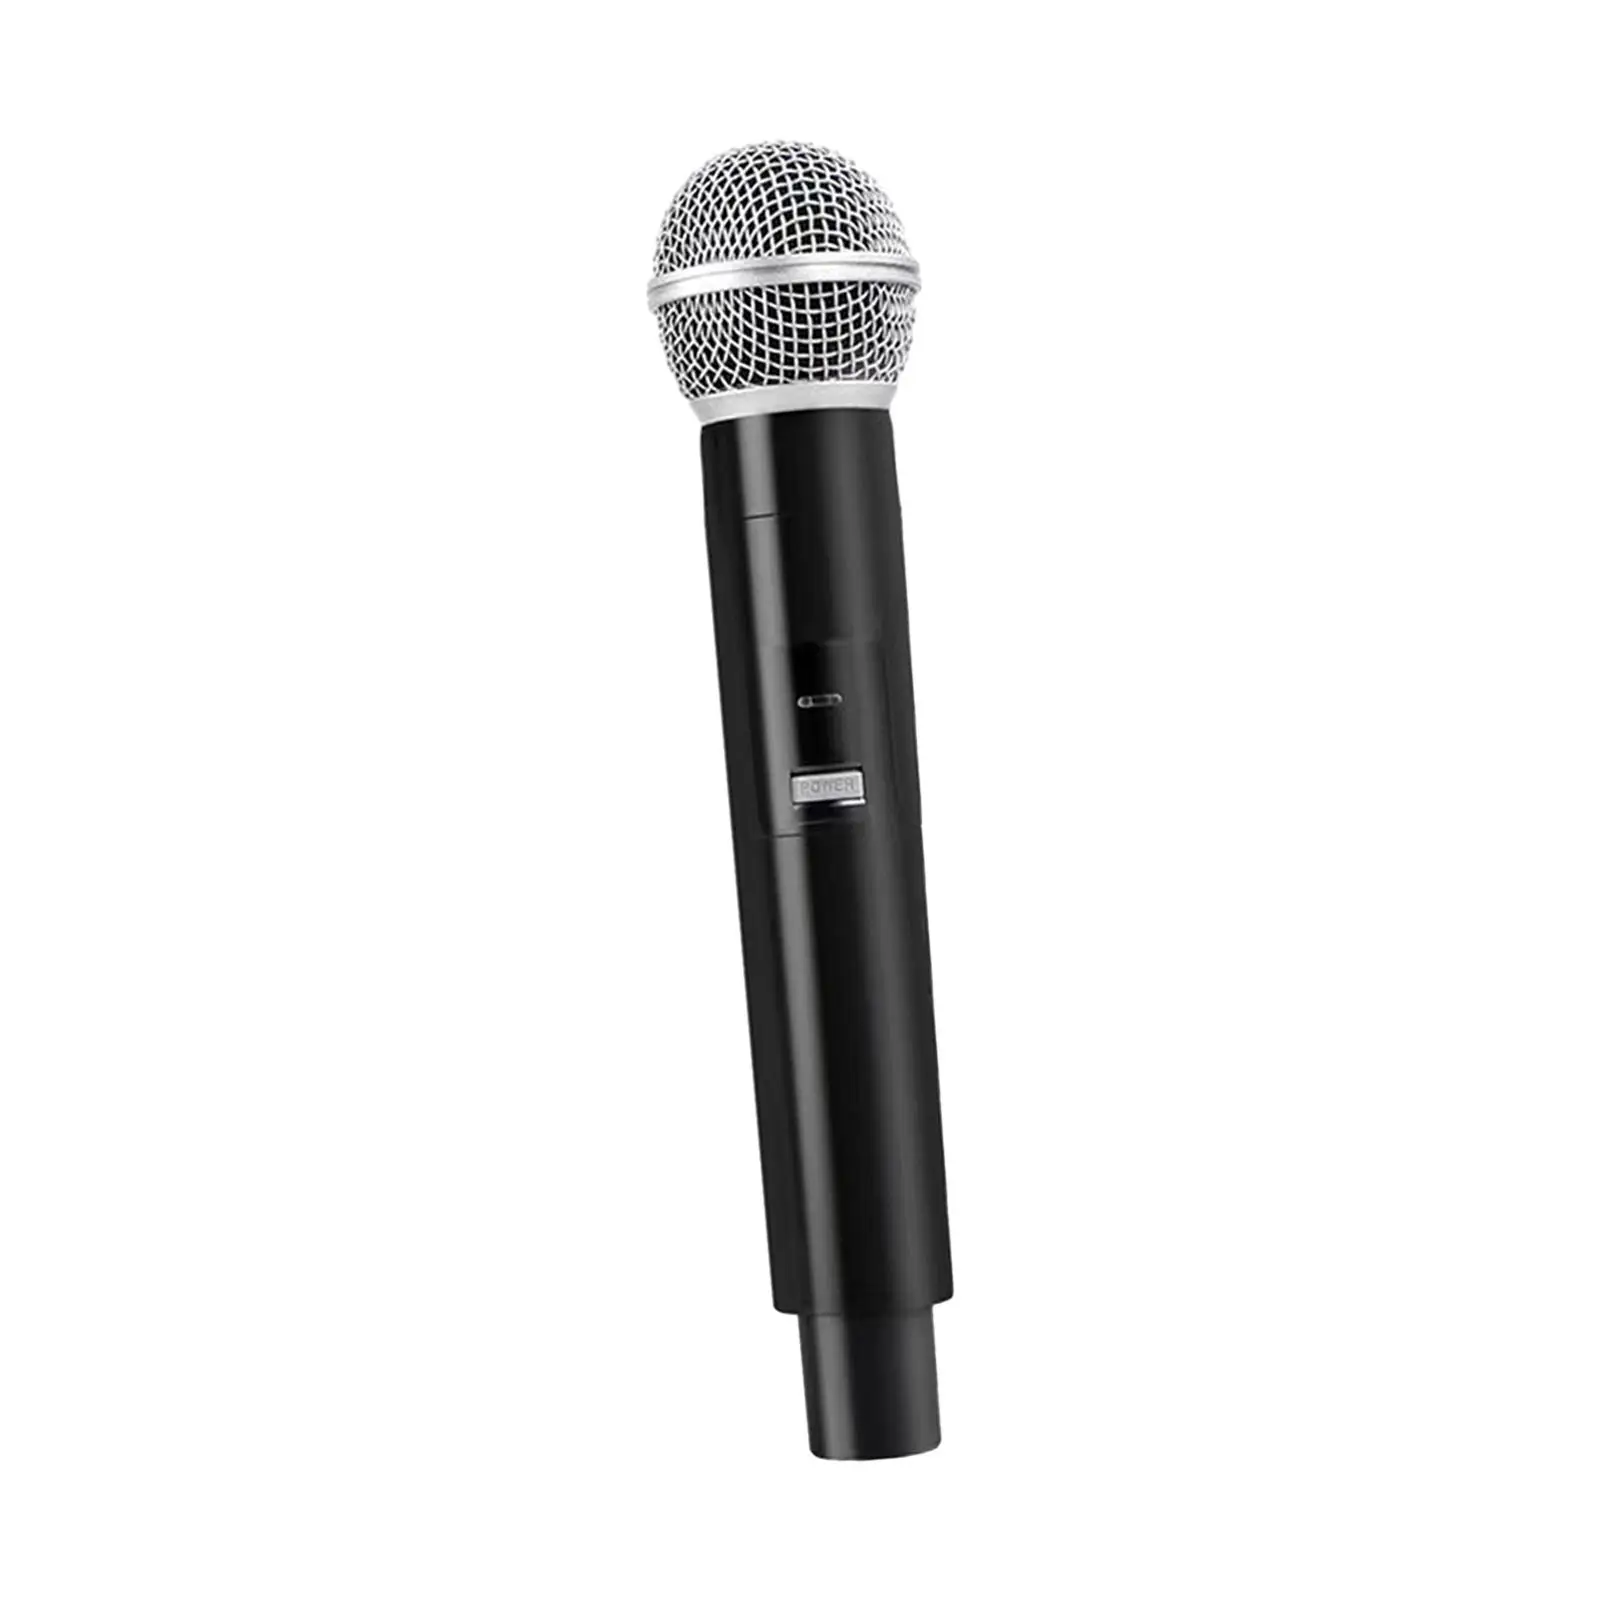 Fake Prop Microphone Props Handheld Pretend Play Artificial Microphone for Family Reunion Weddings Cosplay Thanksgiving Birthday